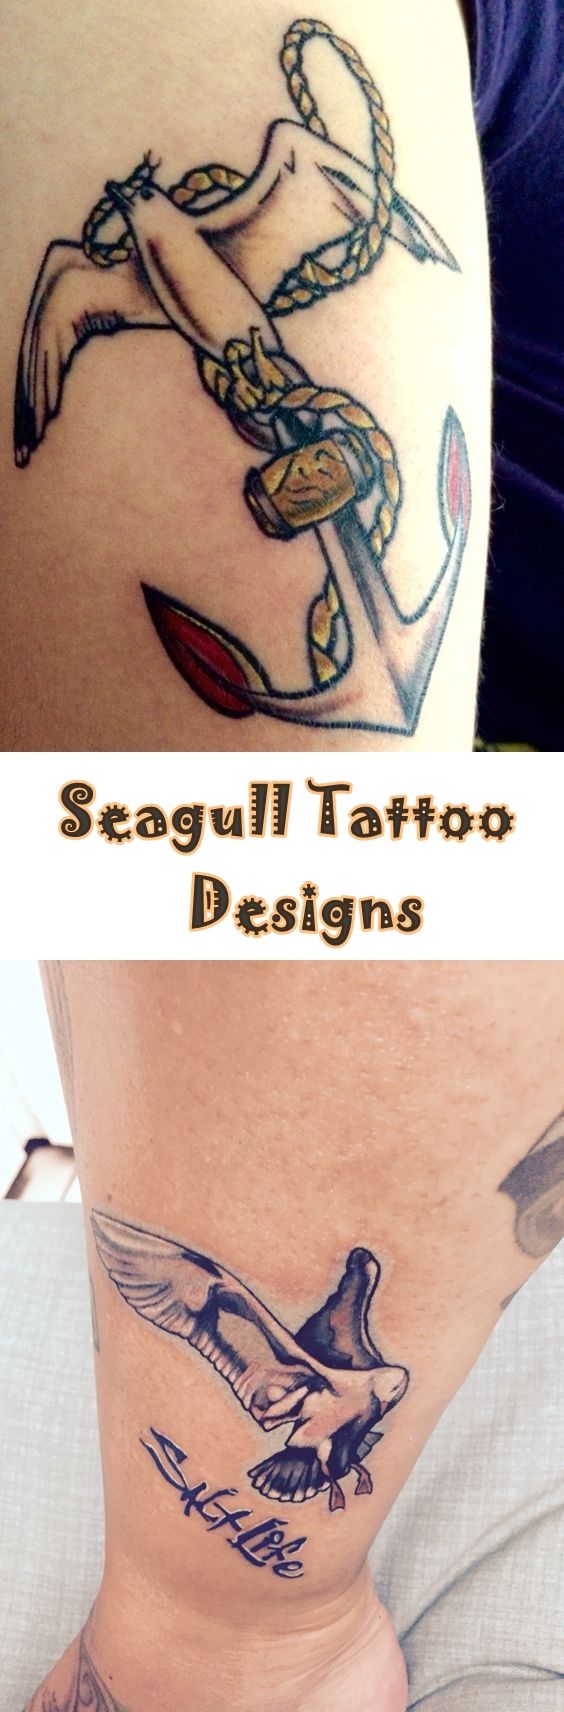 30 Cool Seagull Tattoo Designs for Men and Women – EntertainmentMesh